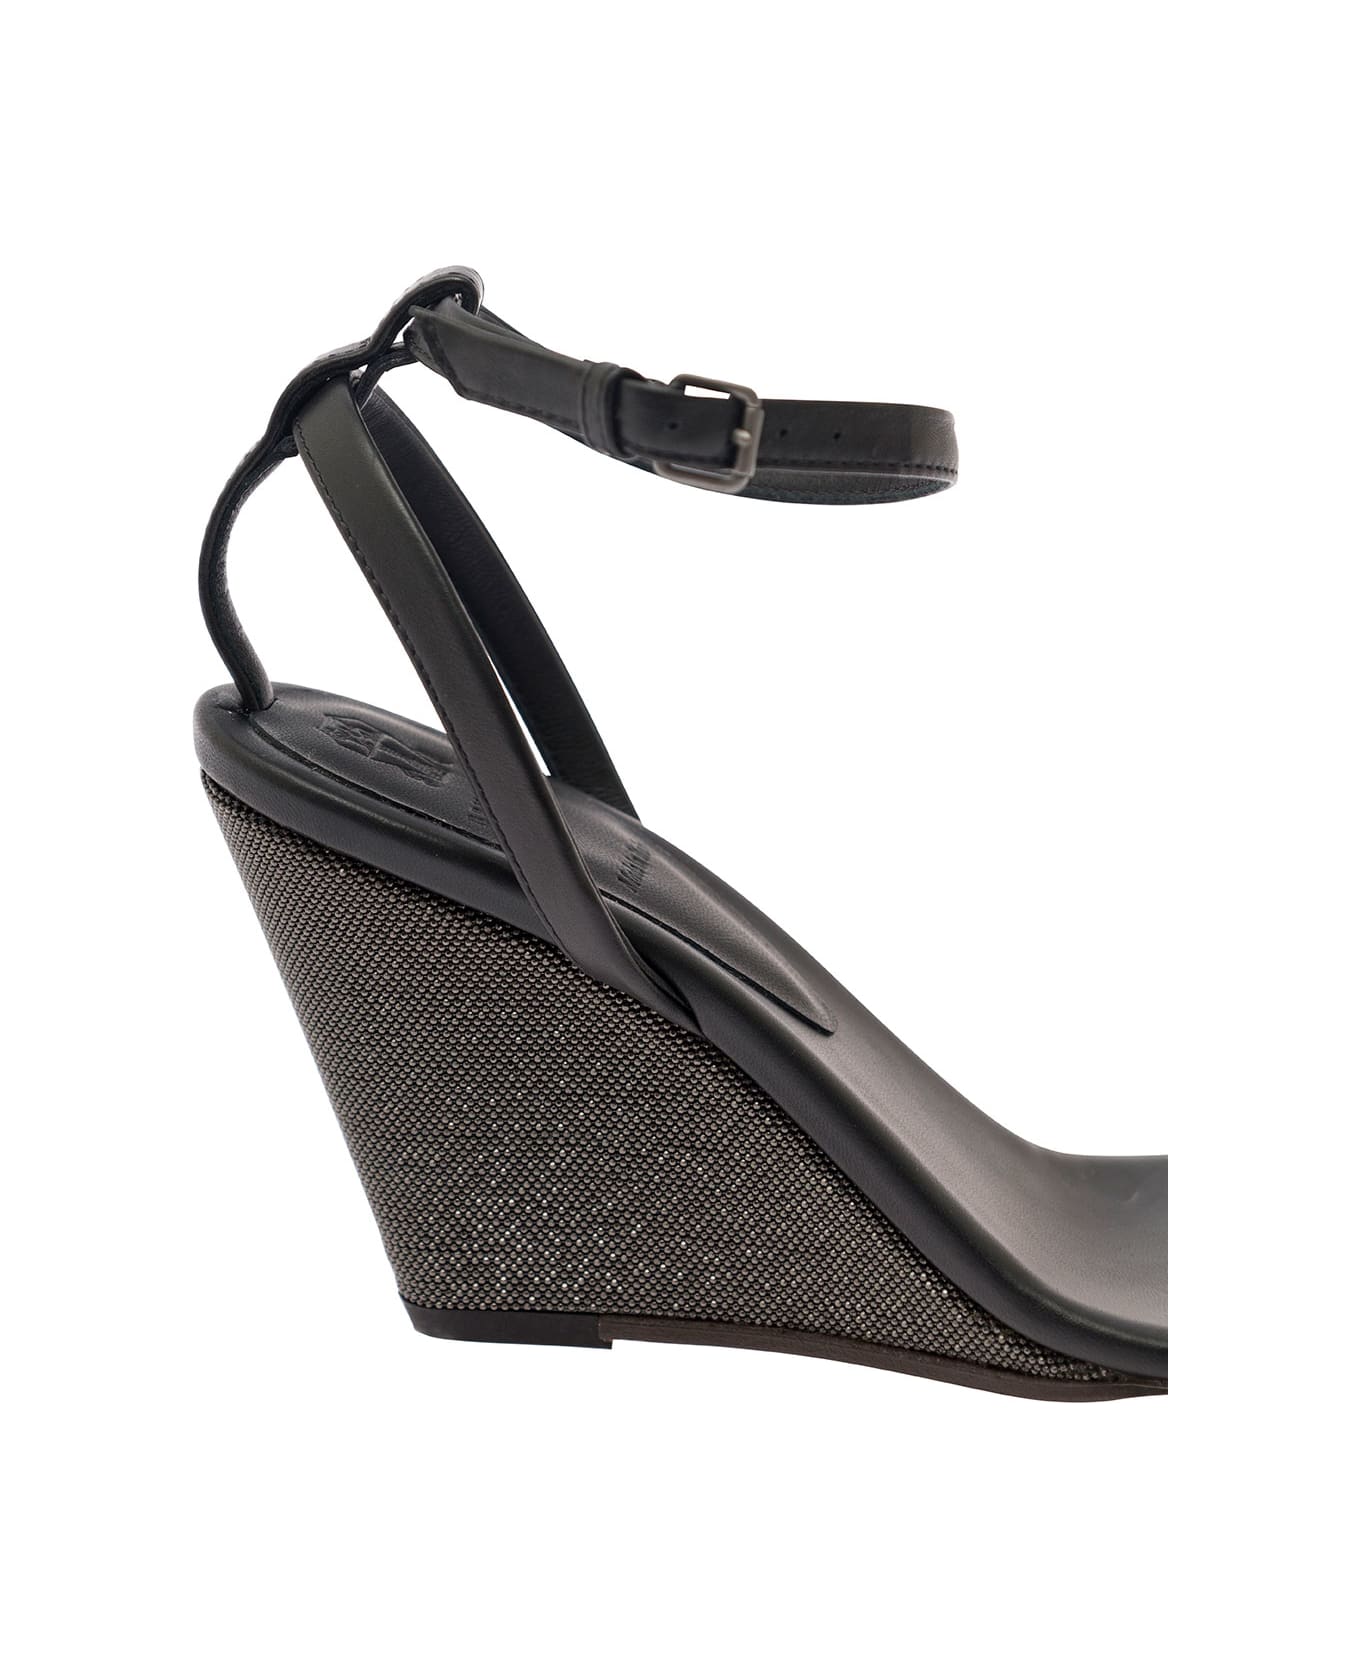 Brunello Cucinelli Black Wedge Sandals With Monile Detail In Leather Woman - Black サンダル